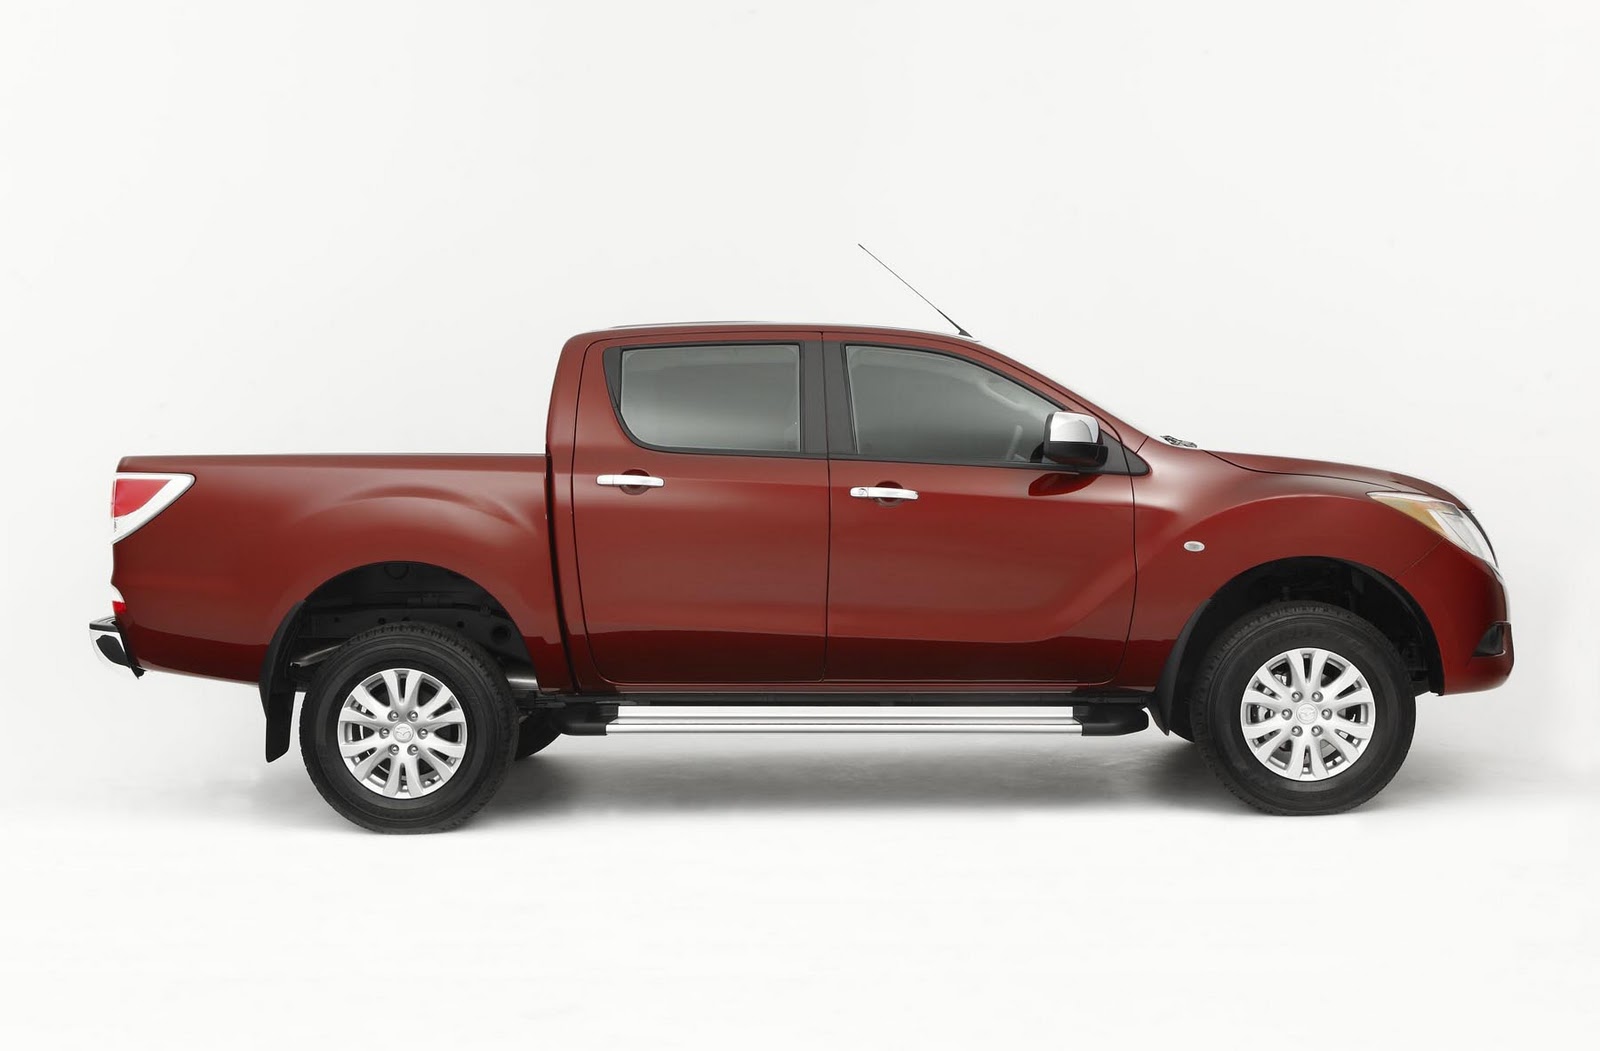 IN4RIDE: 2010 MAZDA BT-50: REAL PICTURES REVEALED